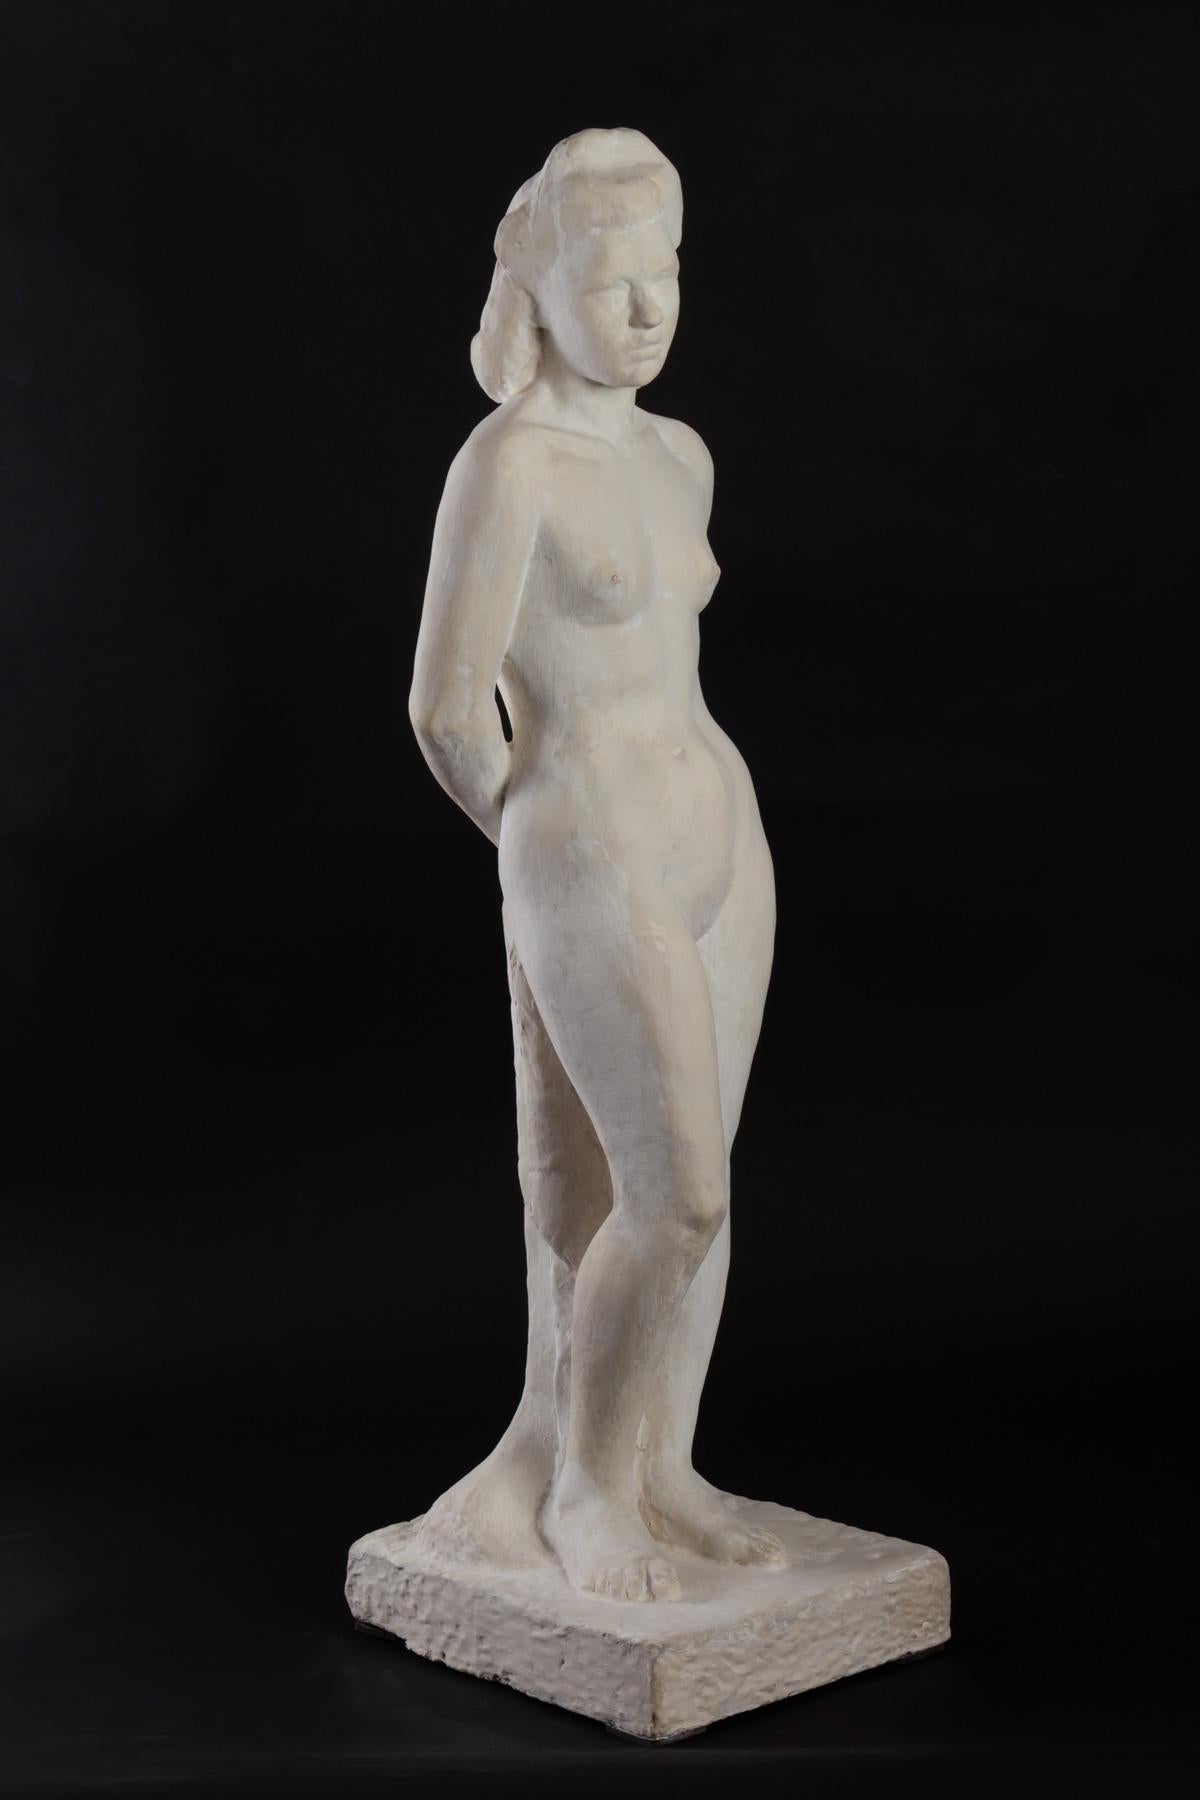 Plaster sculpture, woman standing, Raymond Espinasse (1897-1985) workshop, France.
Measure: Height 33.4 inches.